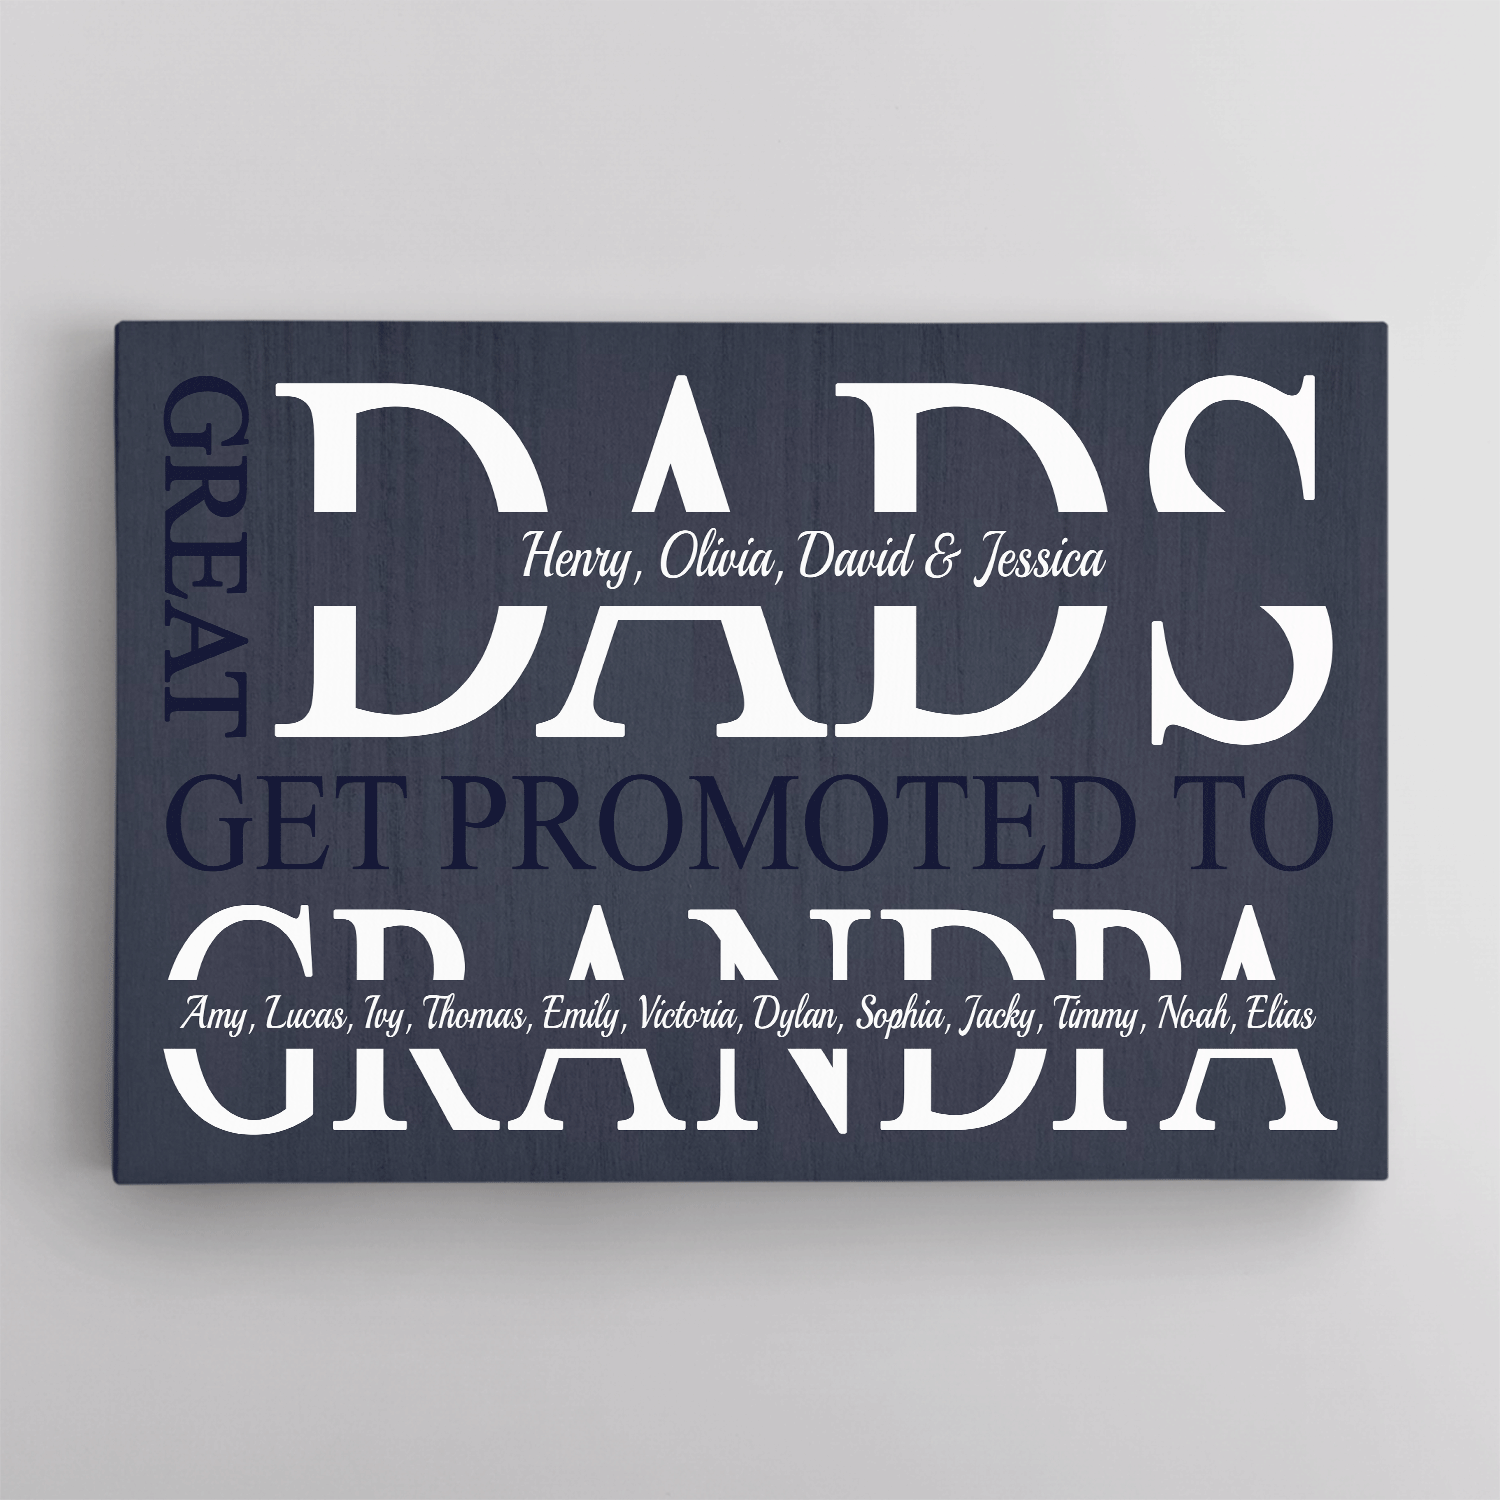 Great Dads Get Promoted to Grandpa Canvas Print